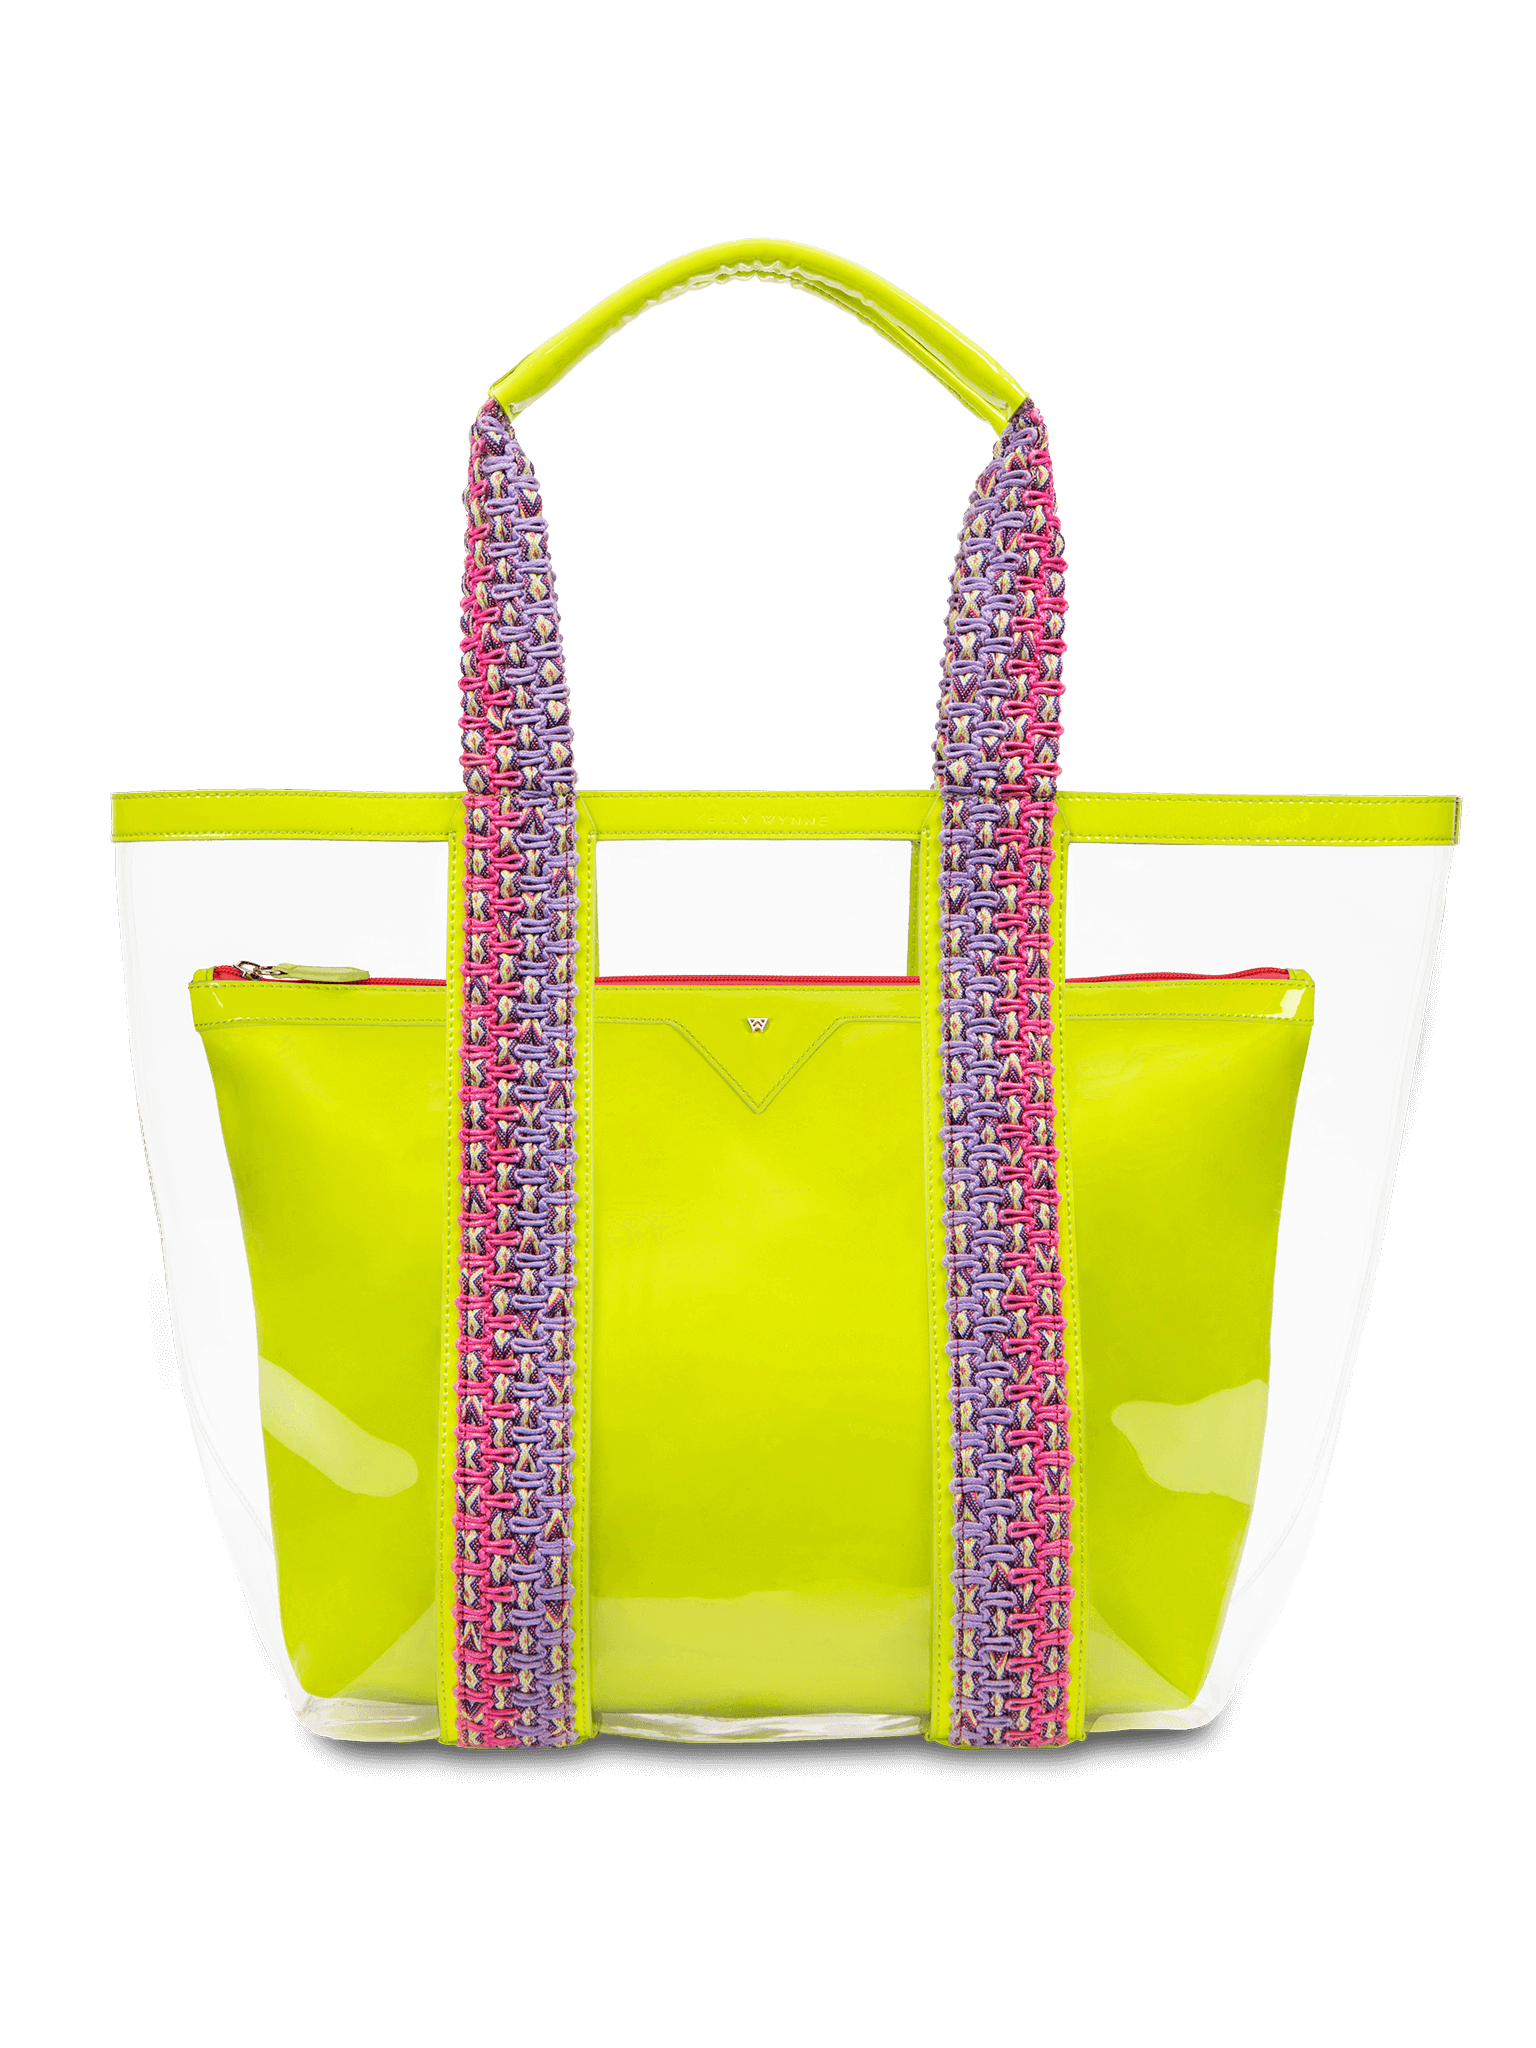 Water resistant, high-quality beach bag. Exterior tote in clear, interior patent leather pouch in neon yellow. 